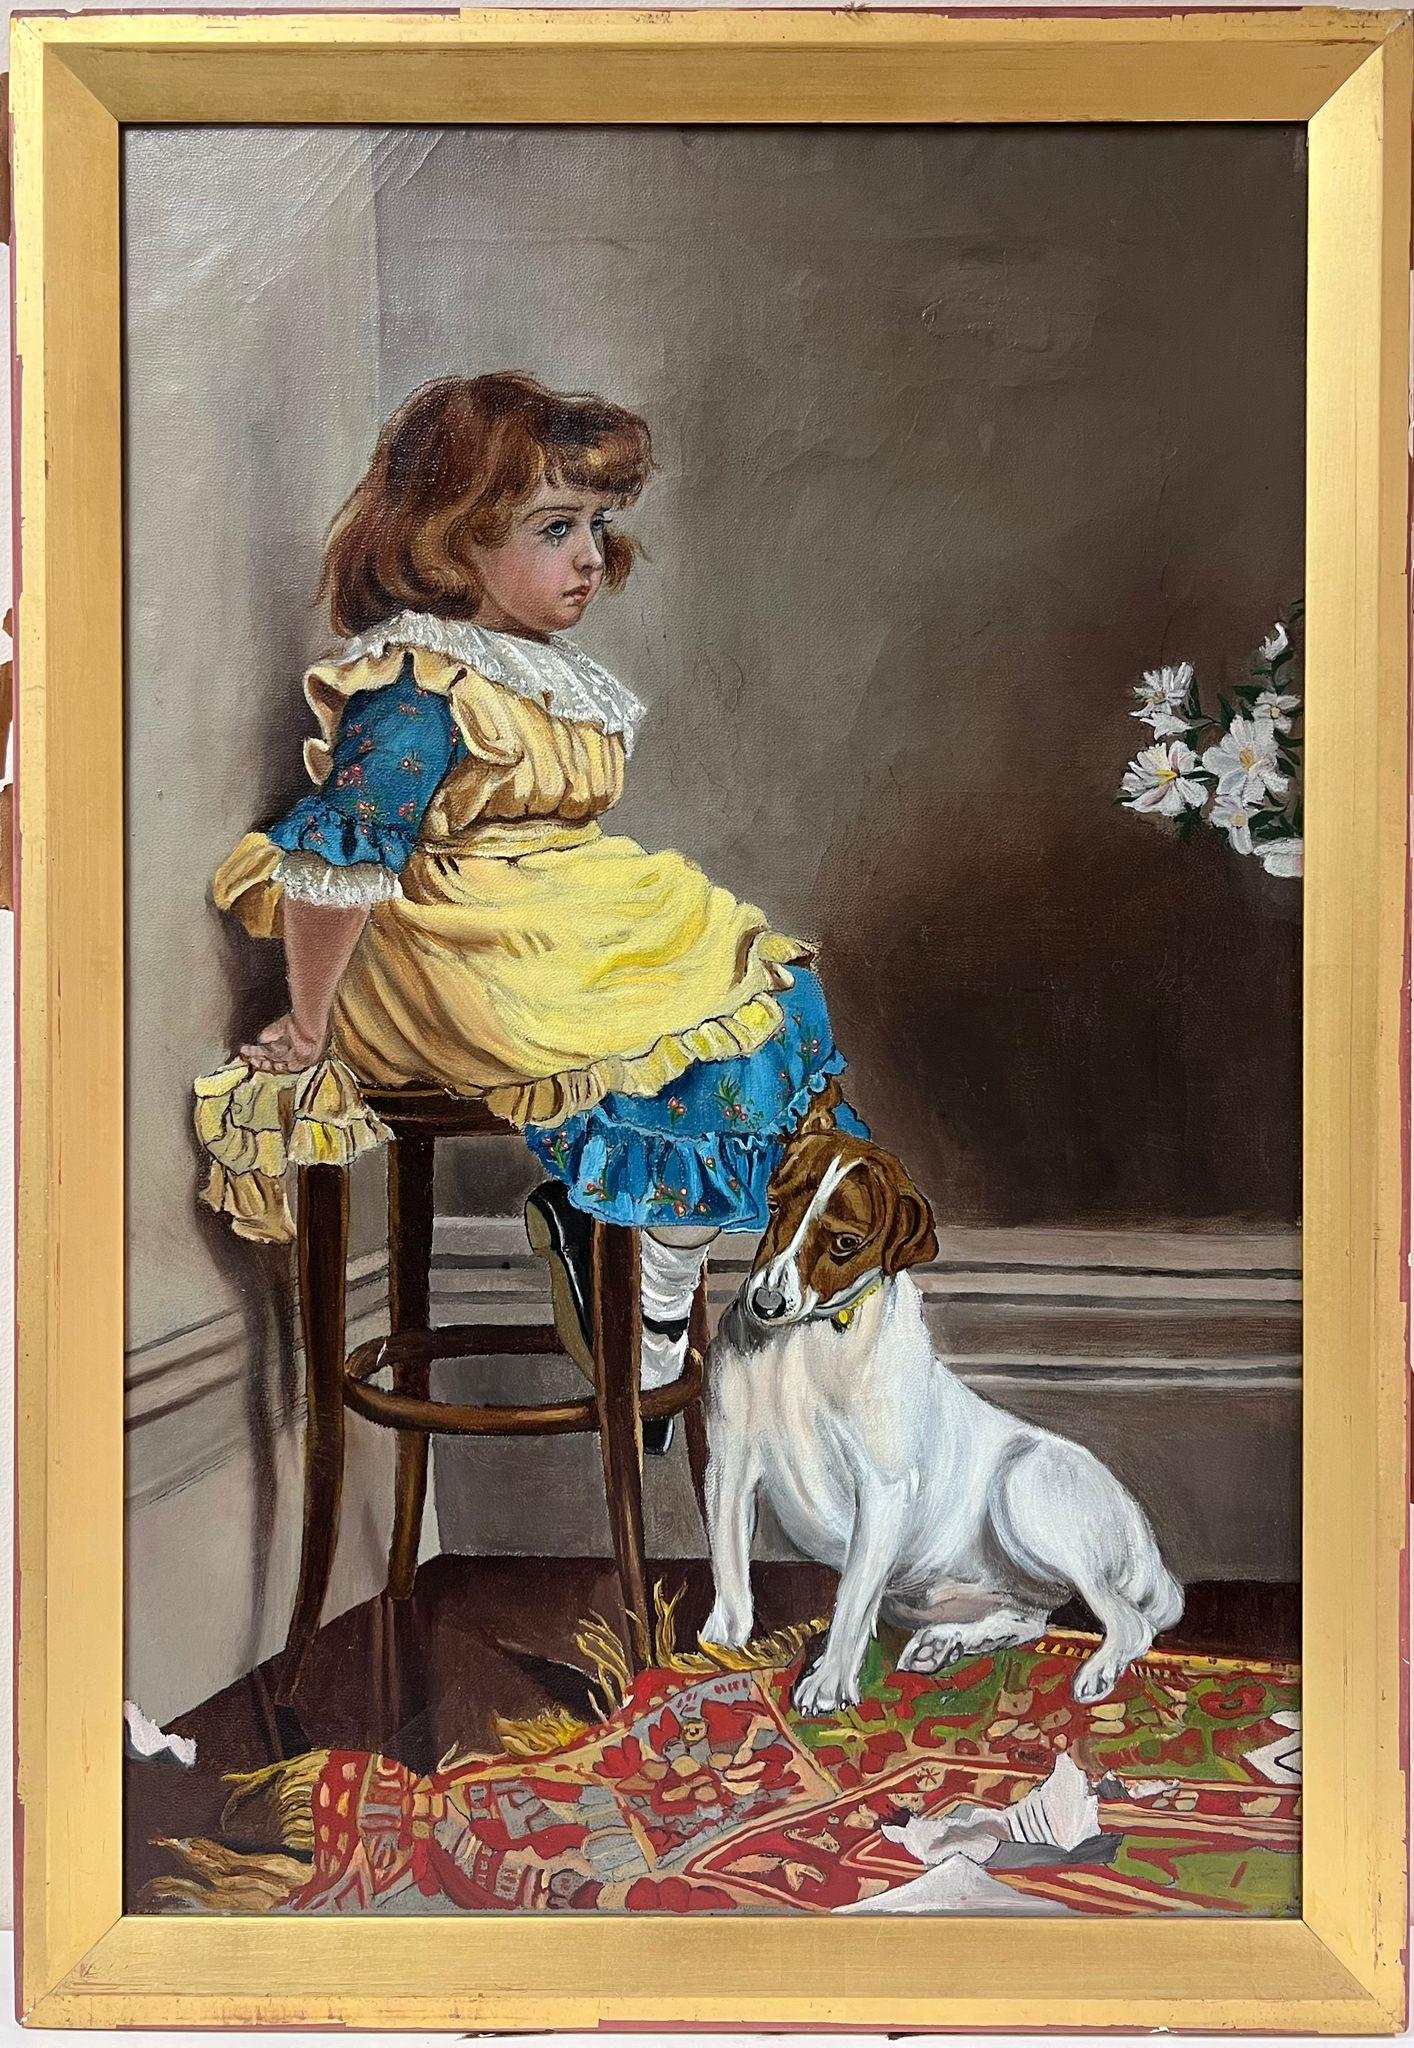 Her Favourite Pet
English artist, late 19th century
oil on canvas, framed
framed: 25 x 18 inches
canvas : 24 x 16 inches
provenance: private collection, UK
condition: good condition, frame is an inner slip and in average condition.